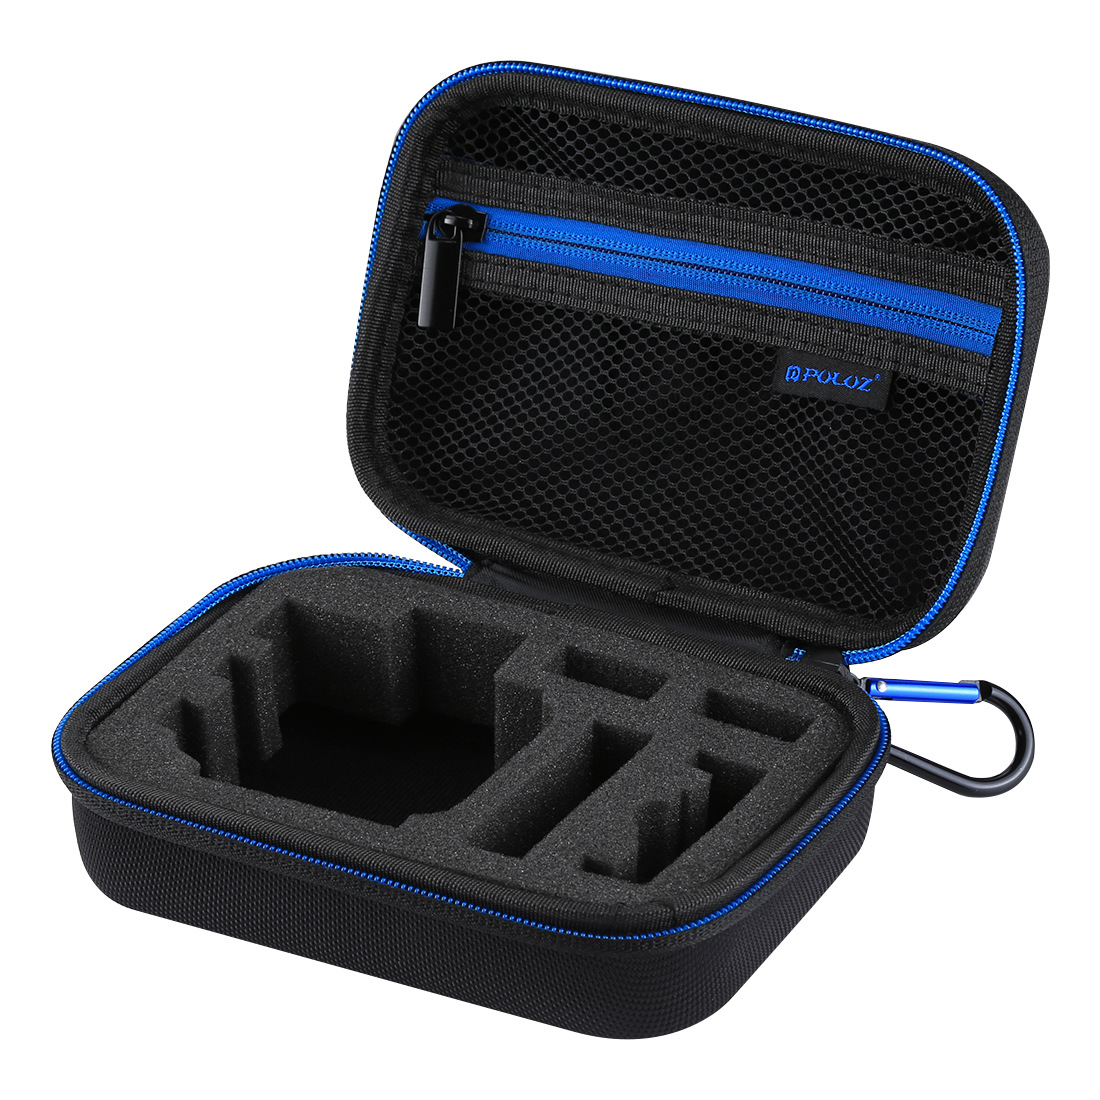 PULUZ Waterproof Travel Carry Bag Case for GoPro HERO 7/6/5/4Session/4/3+/3/2/1